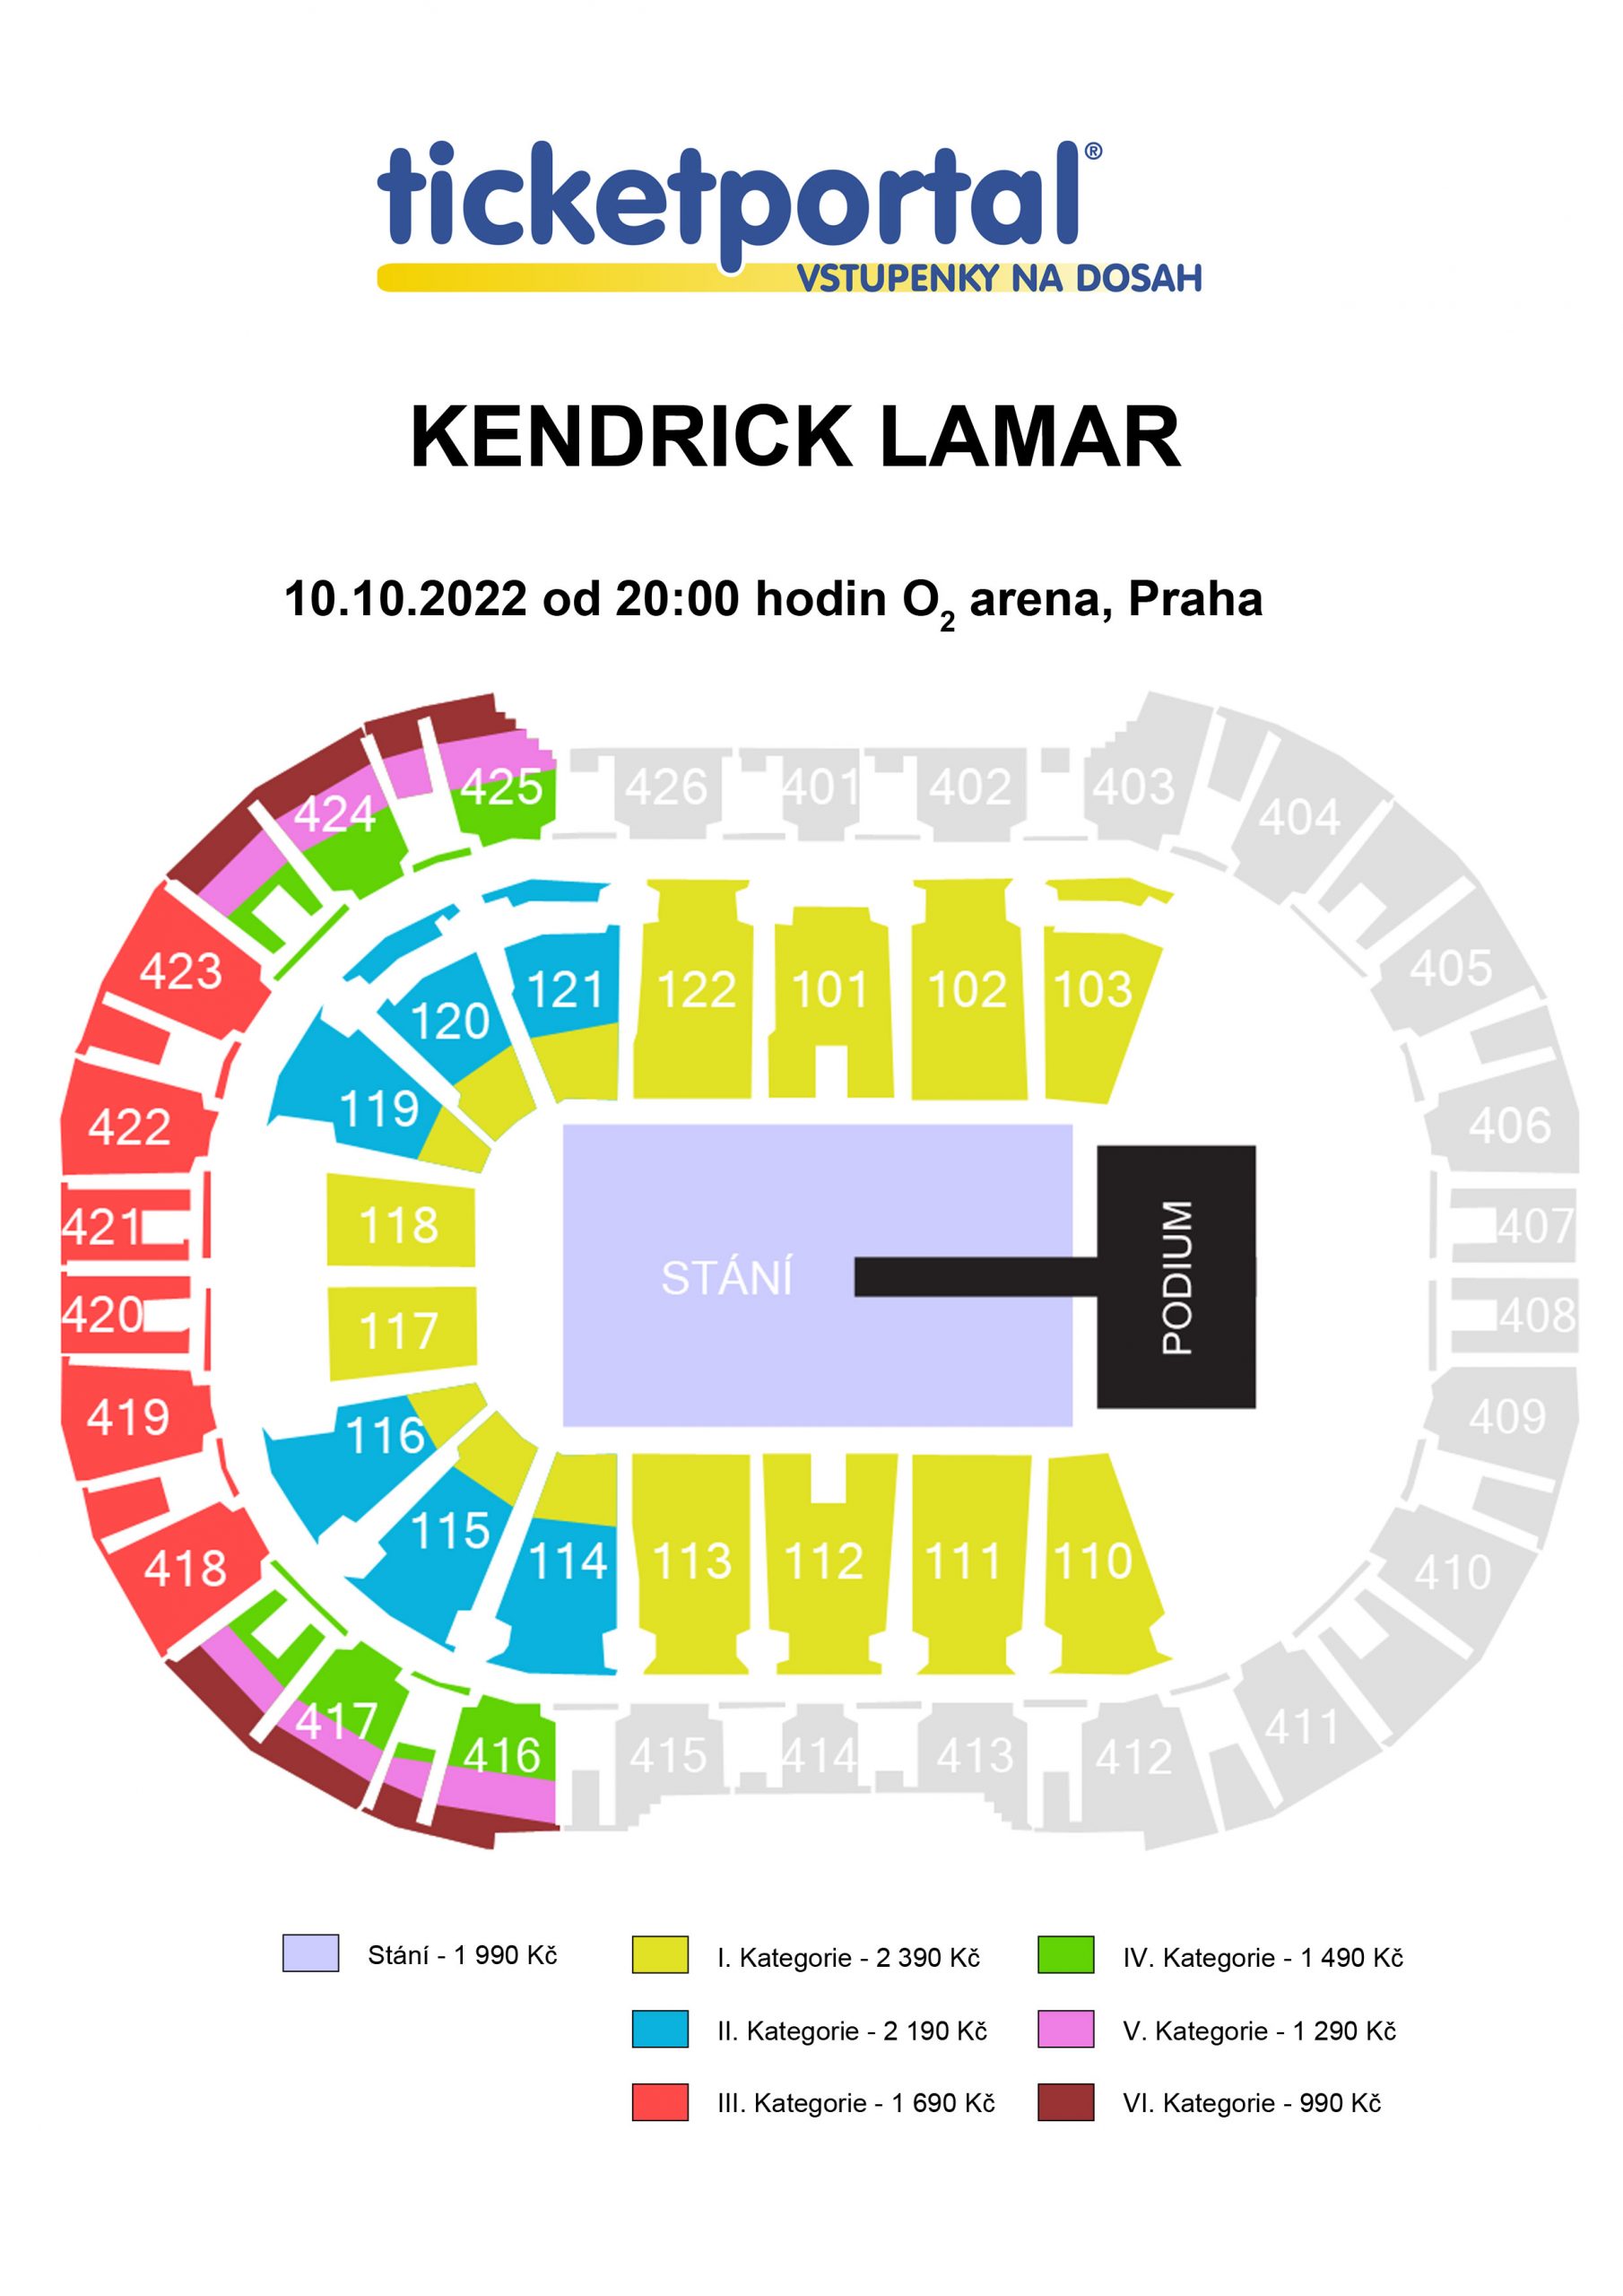 Kendrick Lamar live in October 2022 at Paris Accor Arena: the ticketing  service opens 